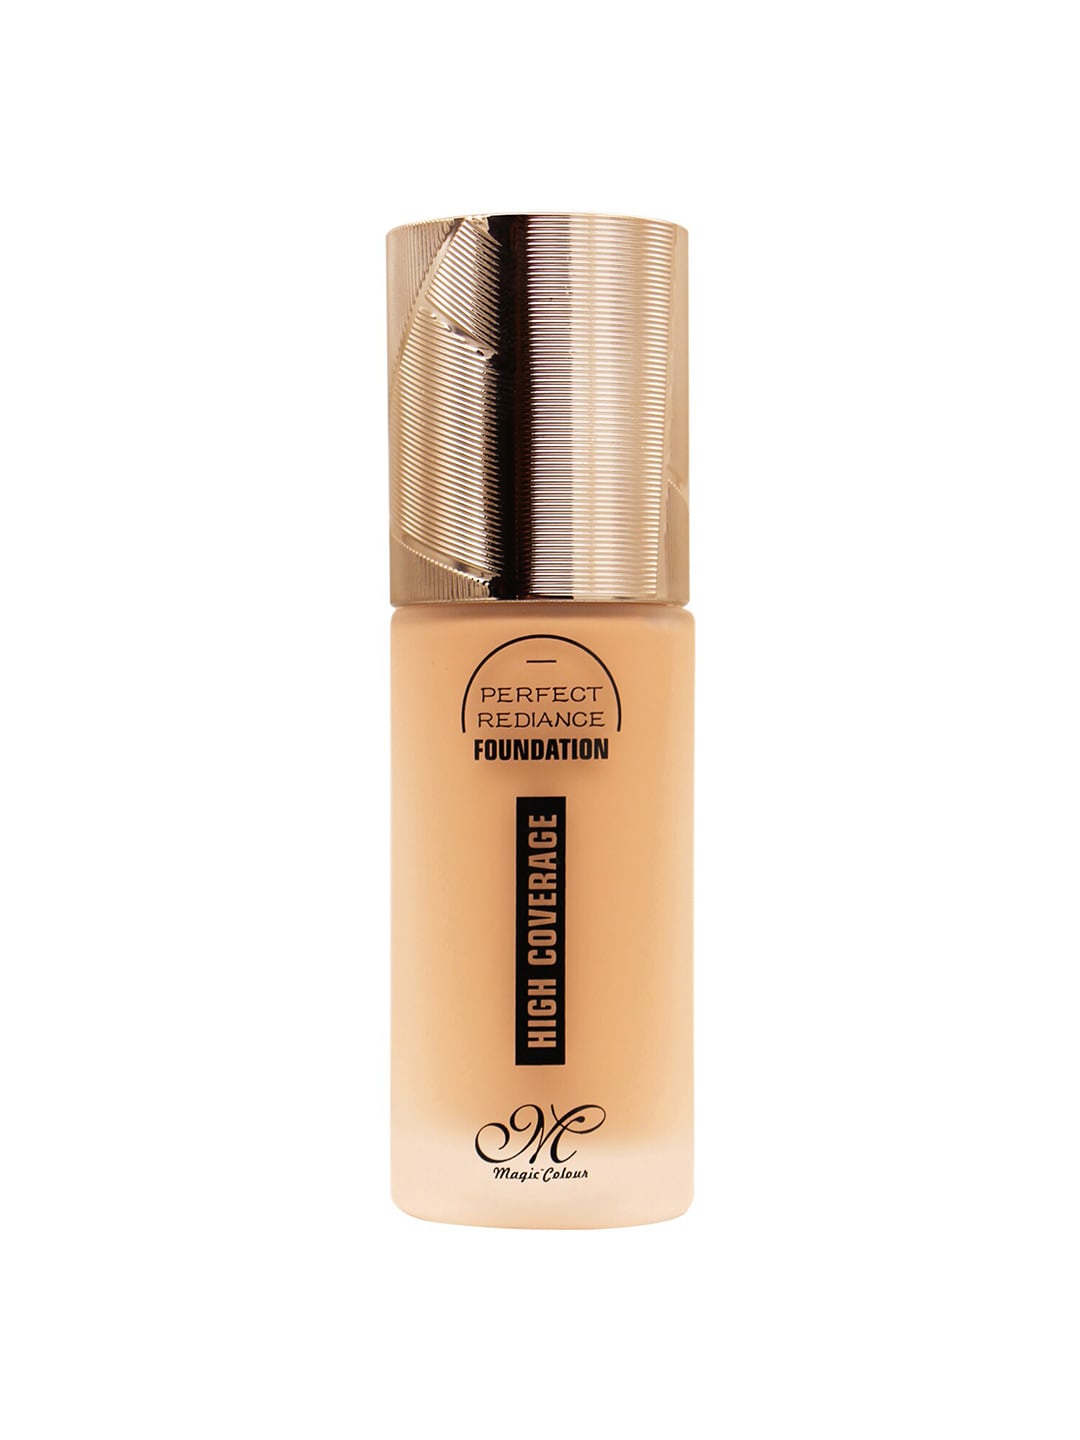 Magic Colour High Coverage Perfect Radiance Foundation - Beige 03 Price in India